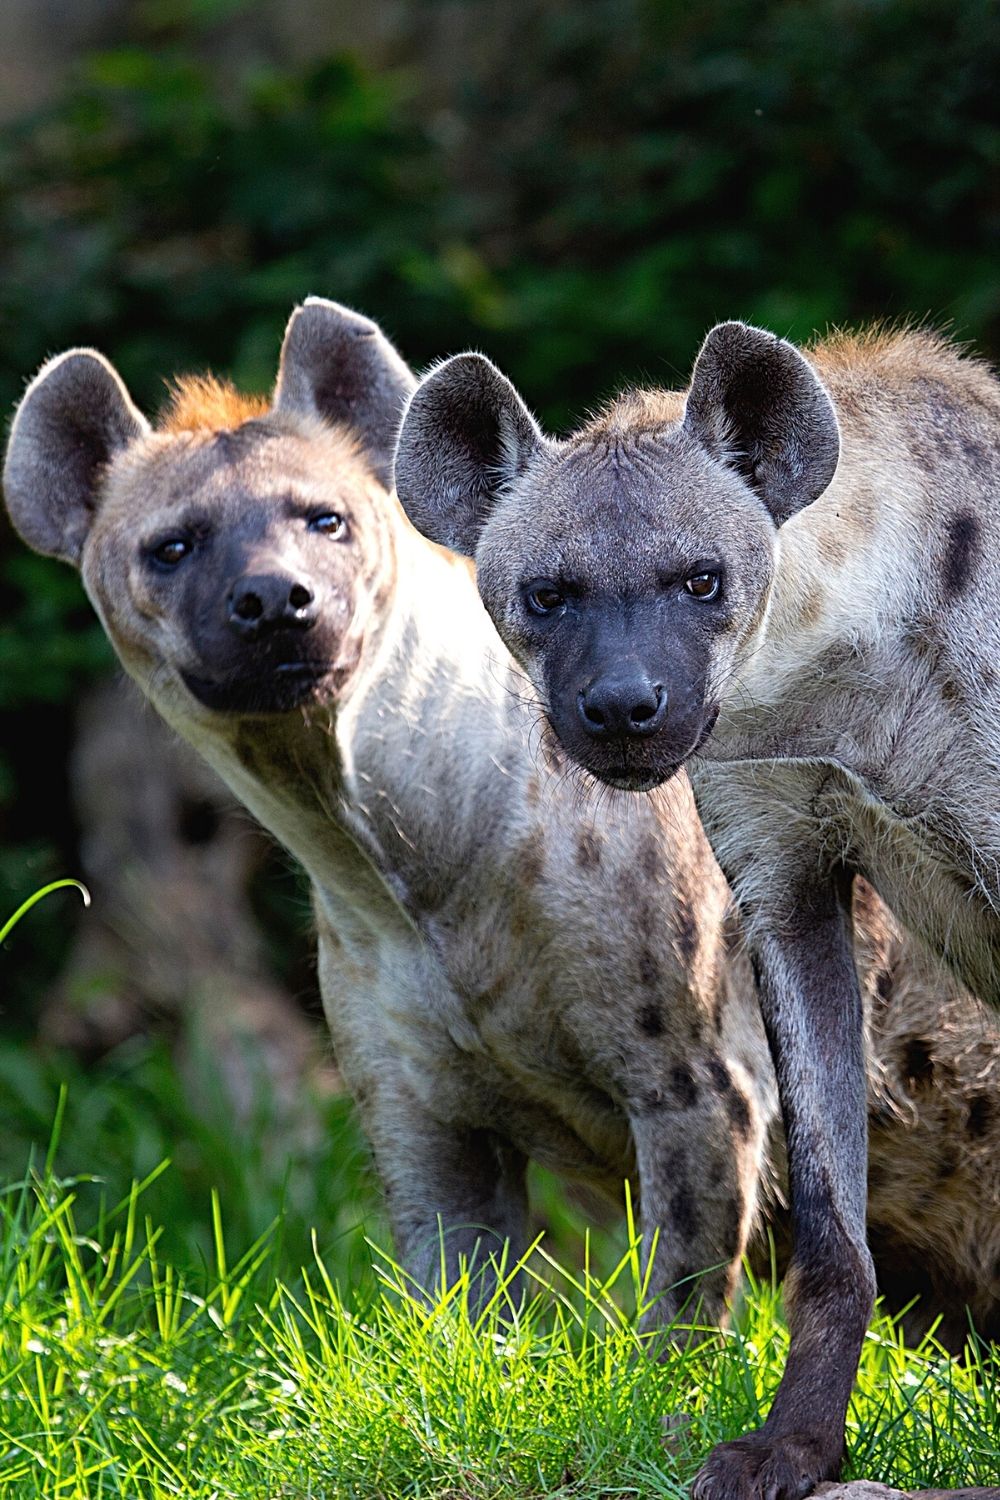 When hyenas hunt large animals like elephants, they form groups of 3 or more